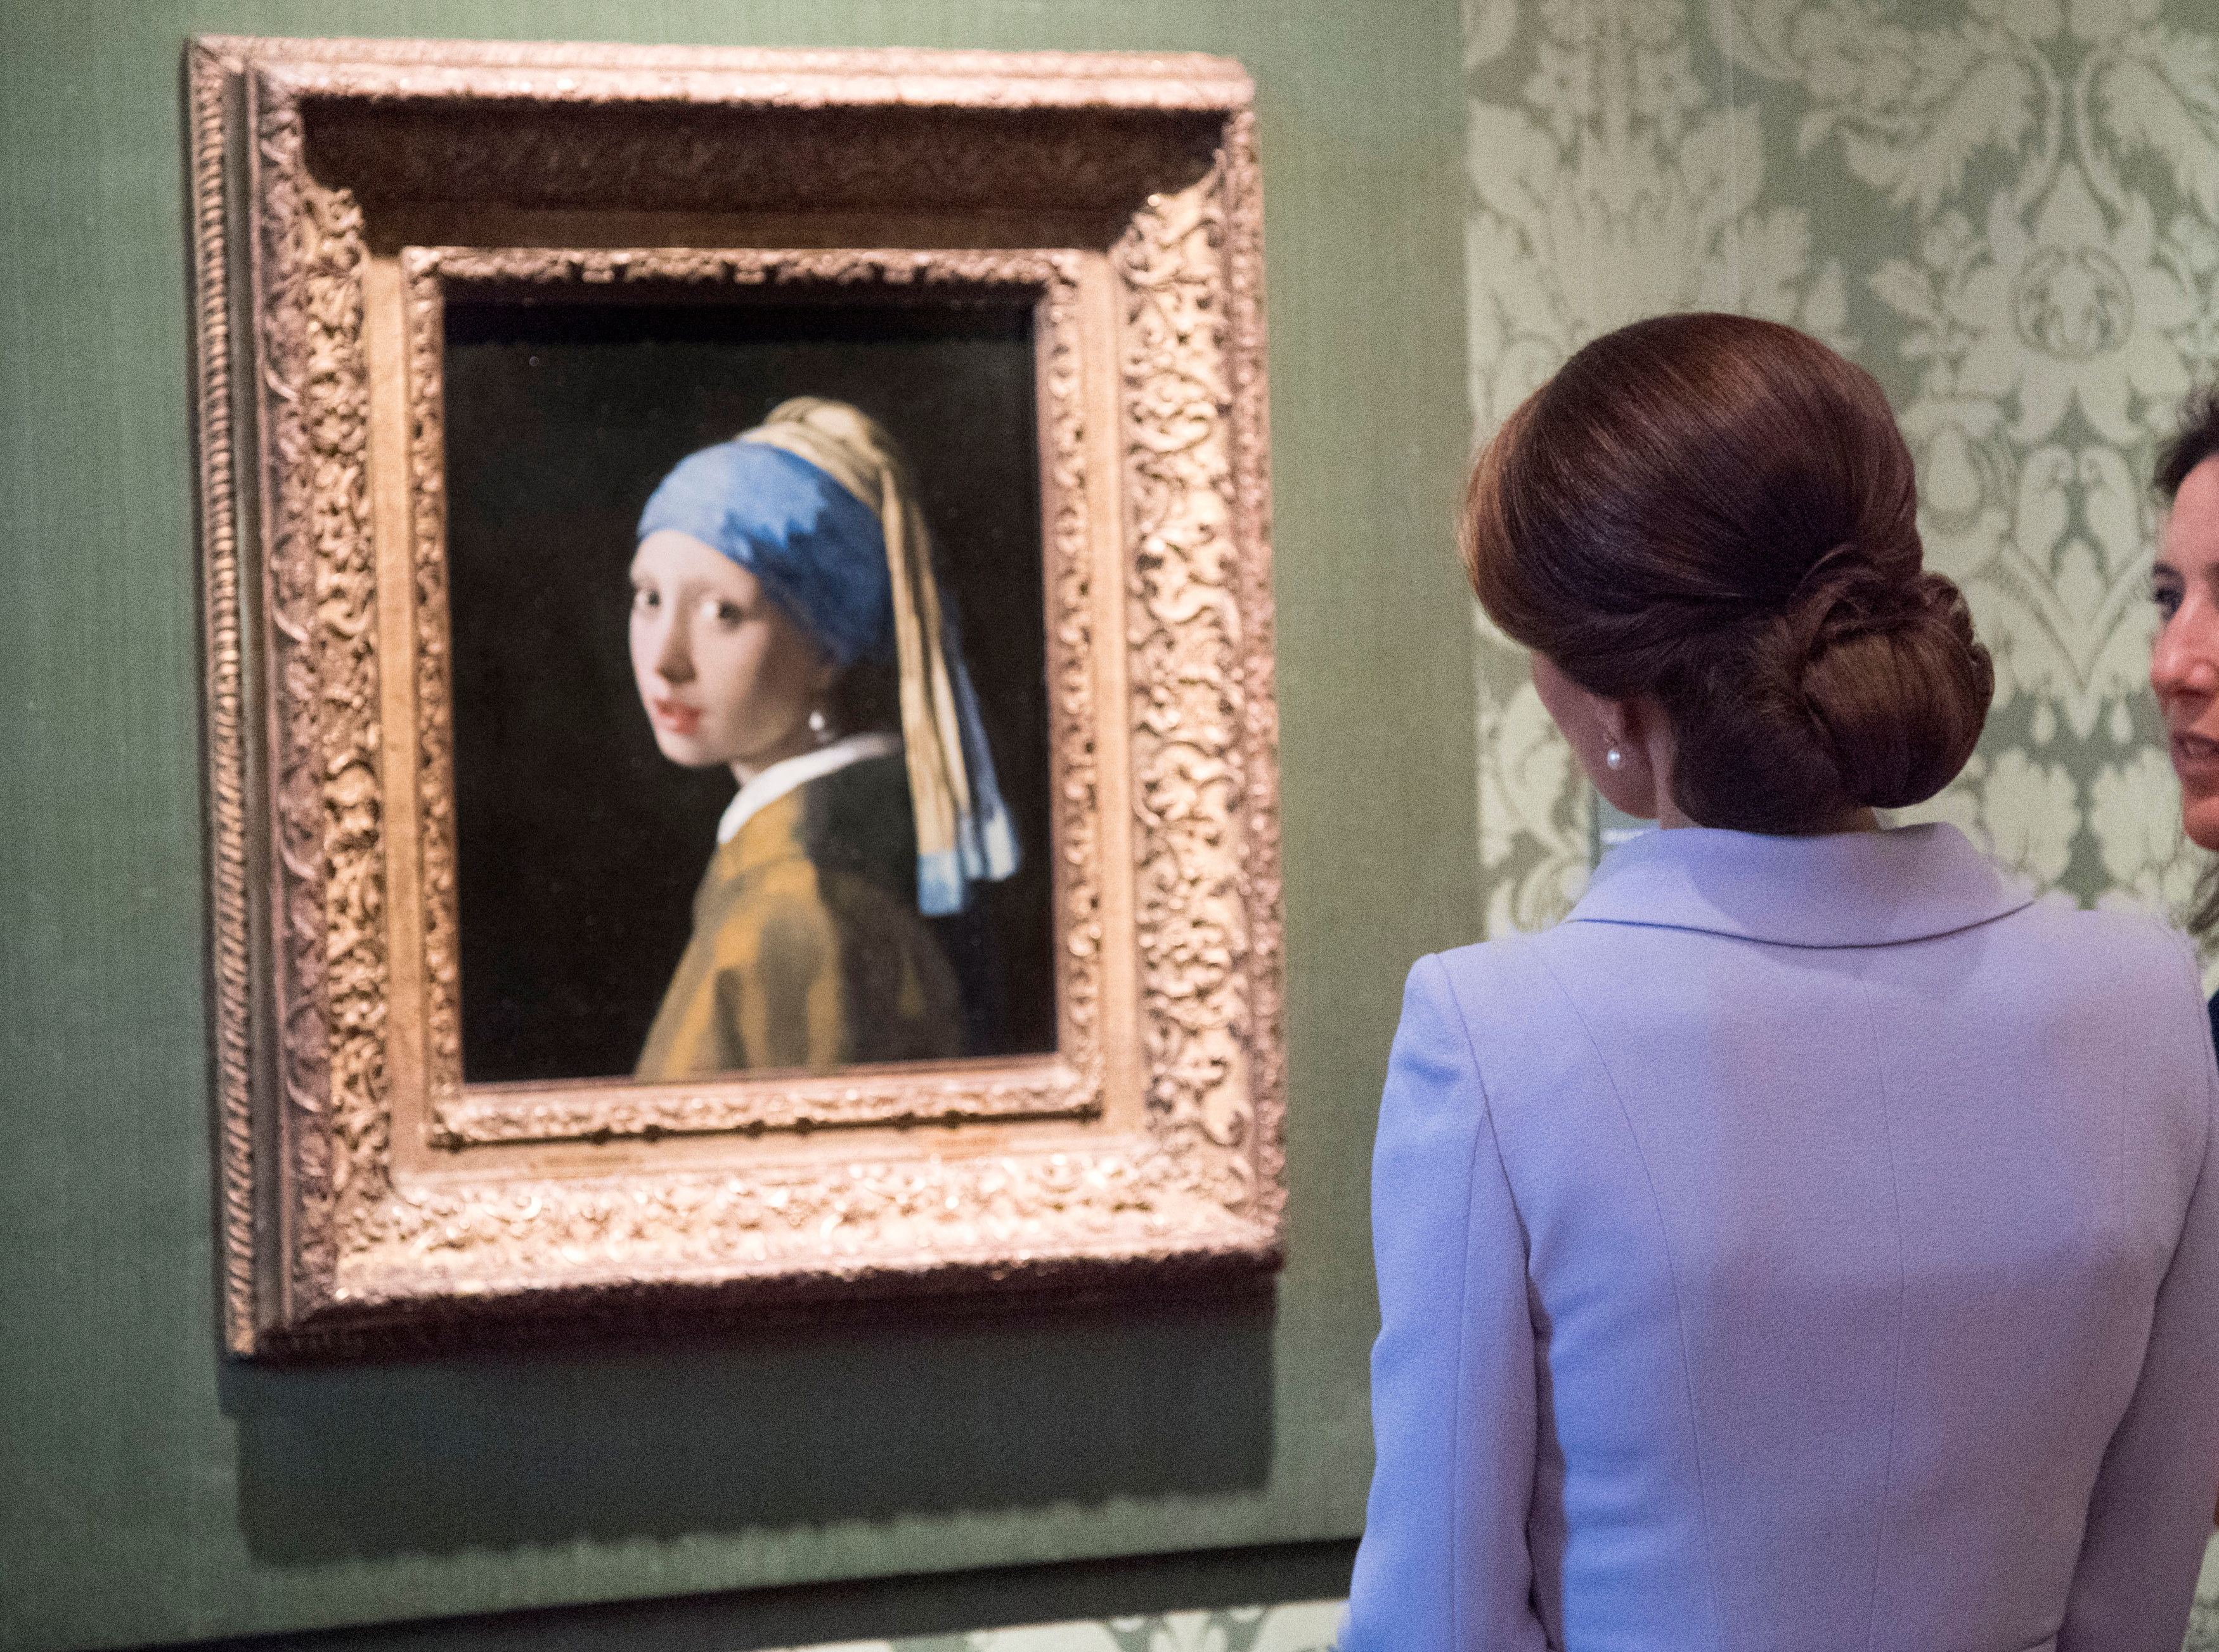 Britain's Kate, the Duchess of Cambridge views Girl with a Pearl Earring by Johannes Vermeer during a visit to the Mauritshuis in The Hague